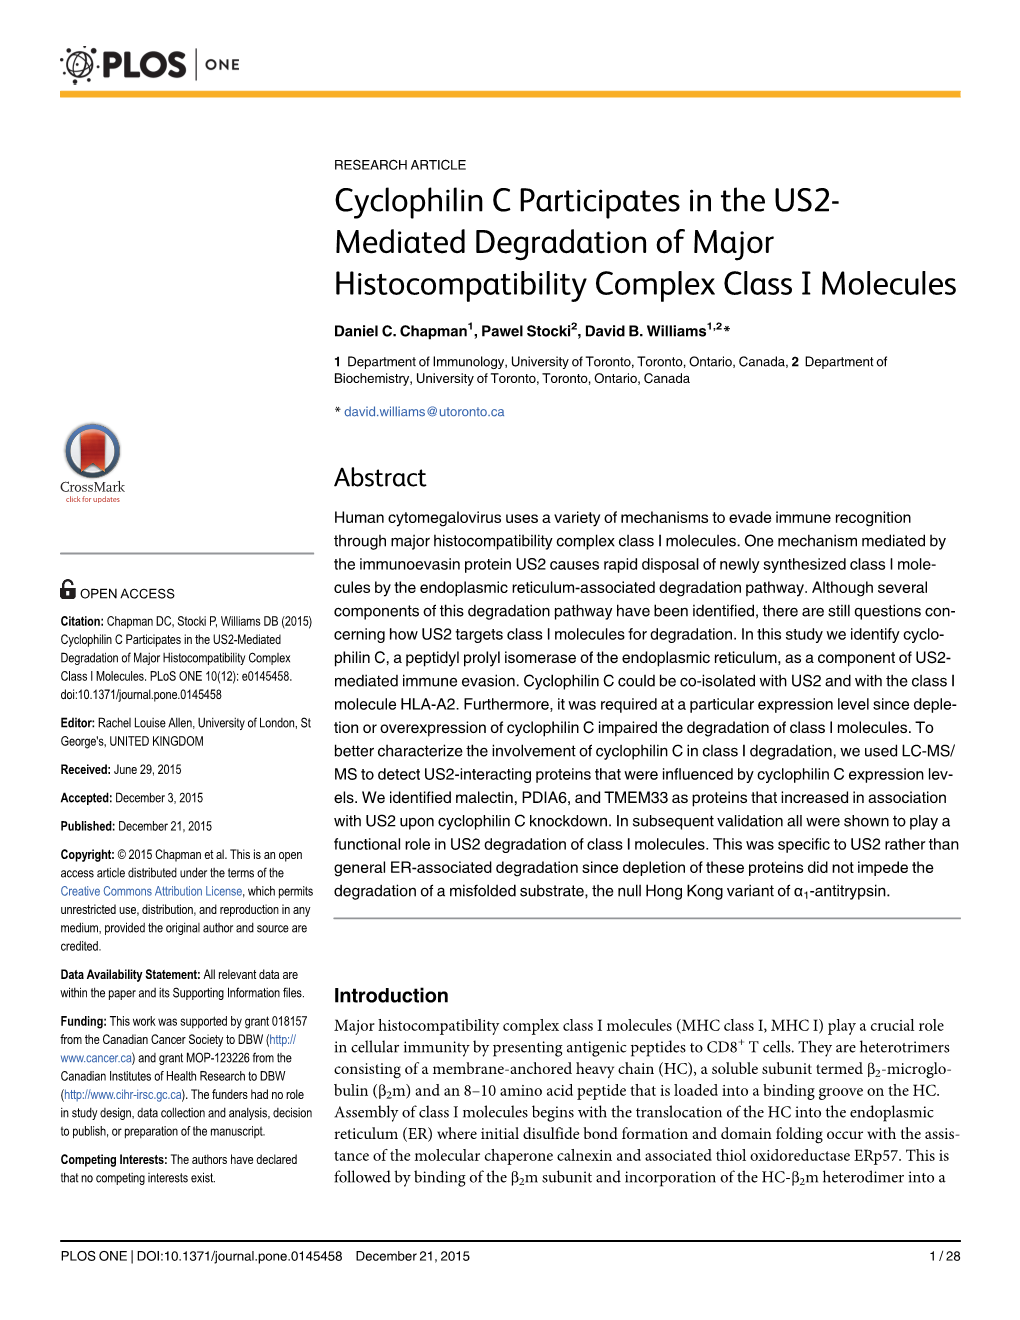 Cyclophilin C Participates in the US2-Mediated Degradation Of